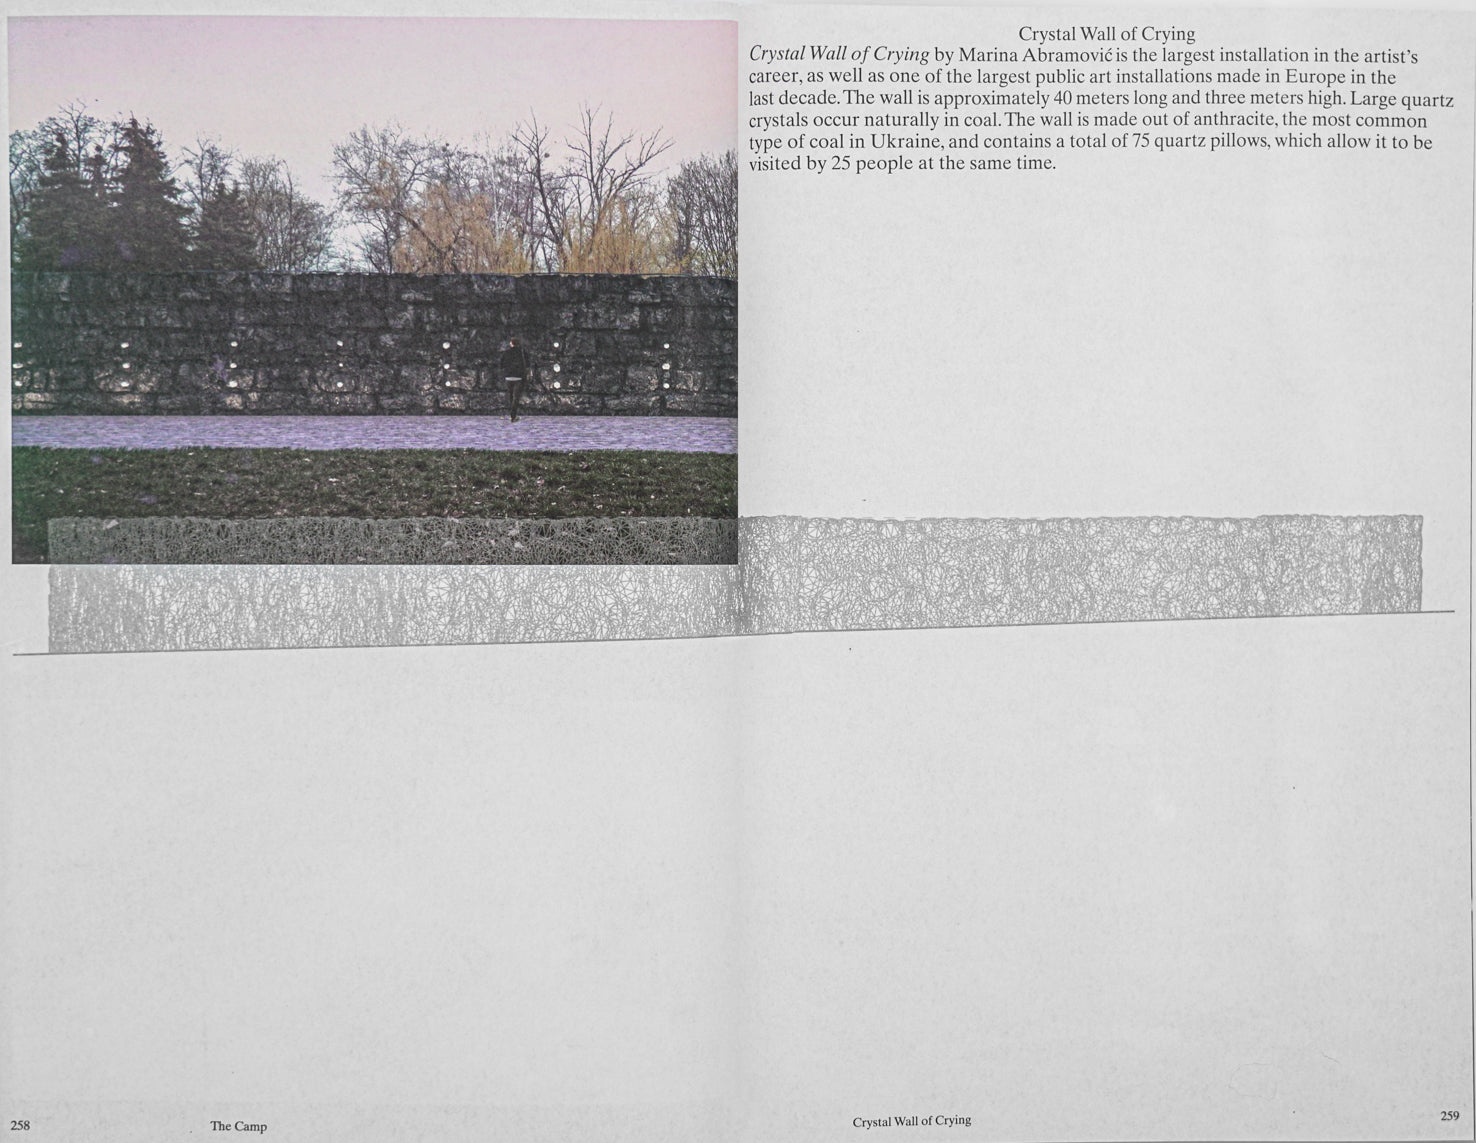 Book spread in monochrome light grey with a short text in black serif on the right page with the title Crystal Wall of Crying and a picture of a wall in front of trees in green, brown and purple colours on the left.